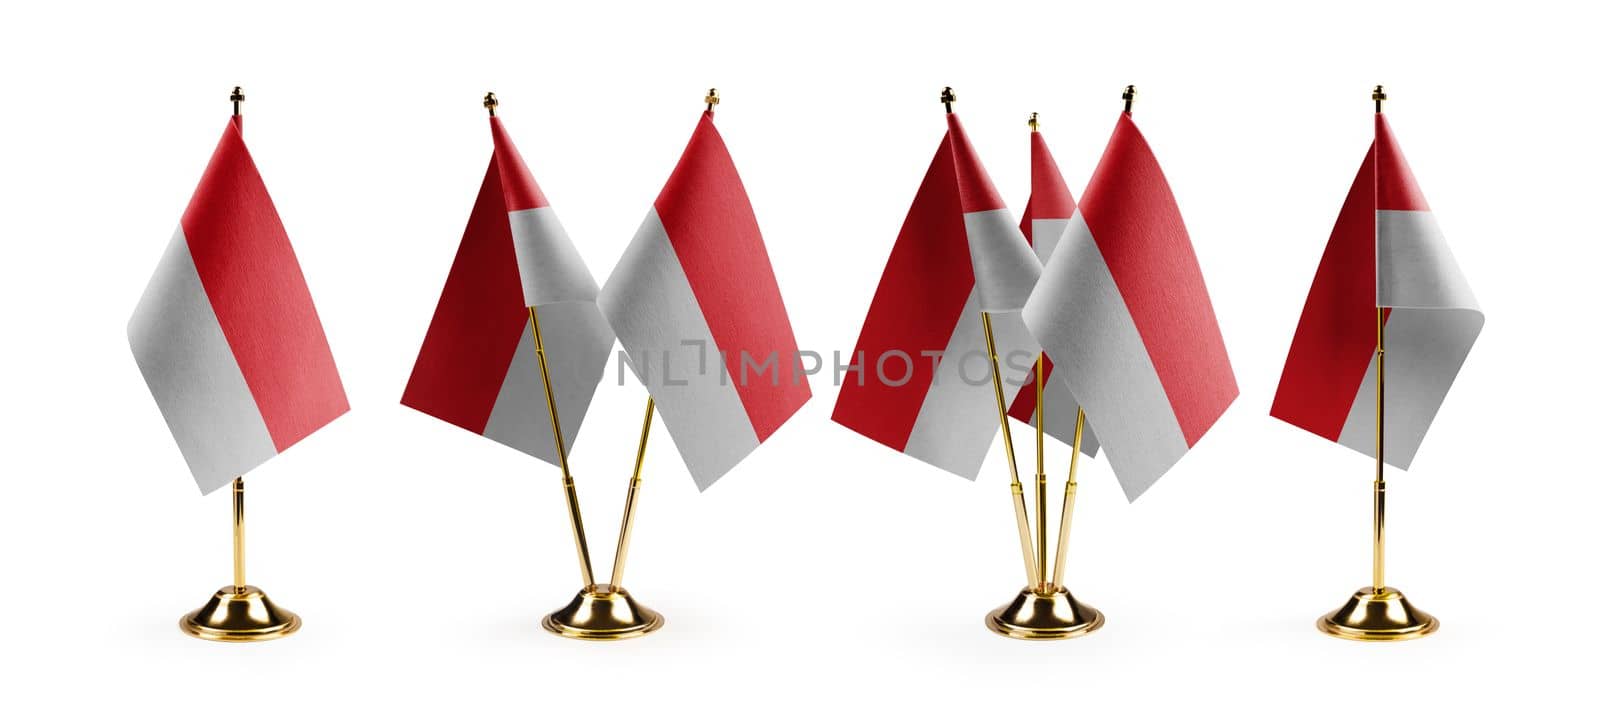 Small national flags of the Indonesia on a white background by butenkow